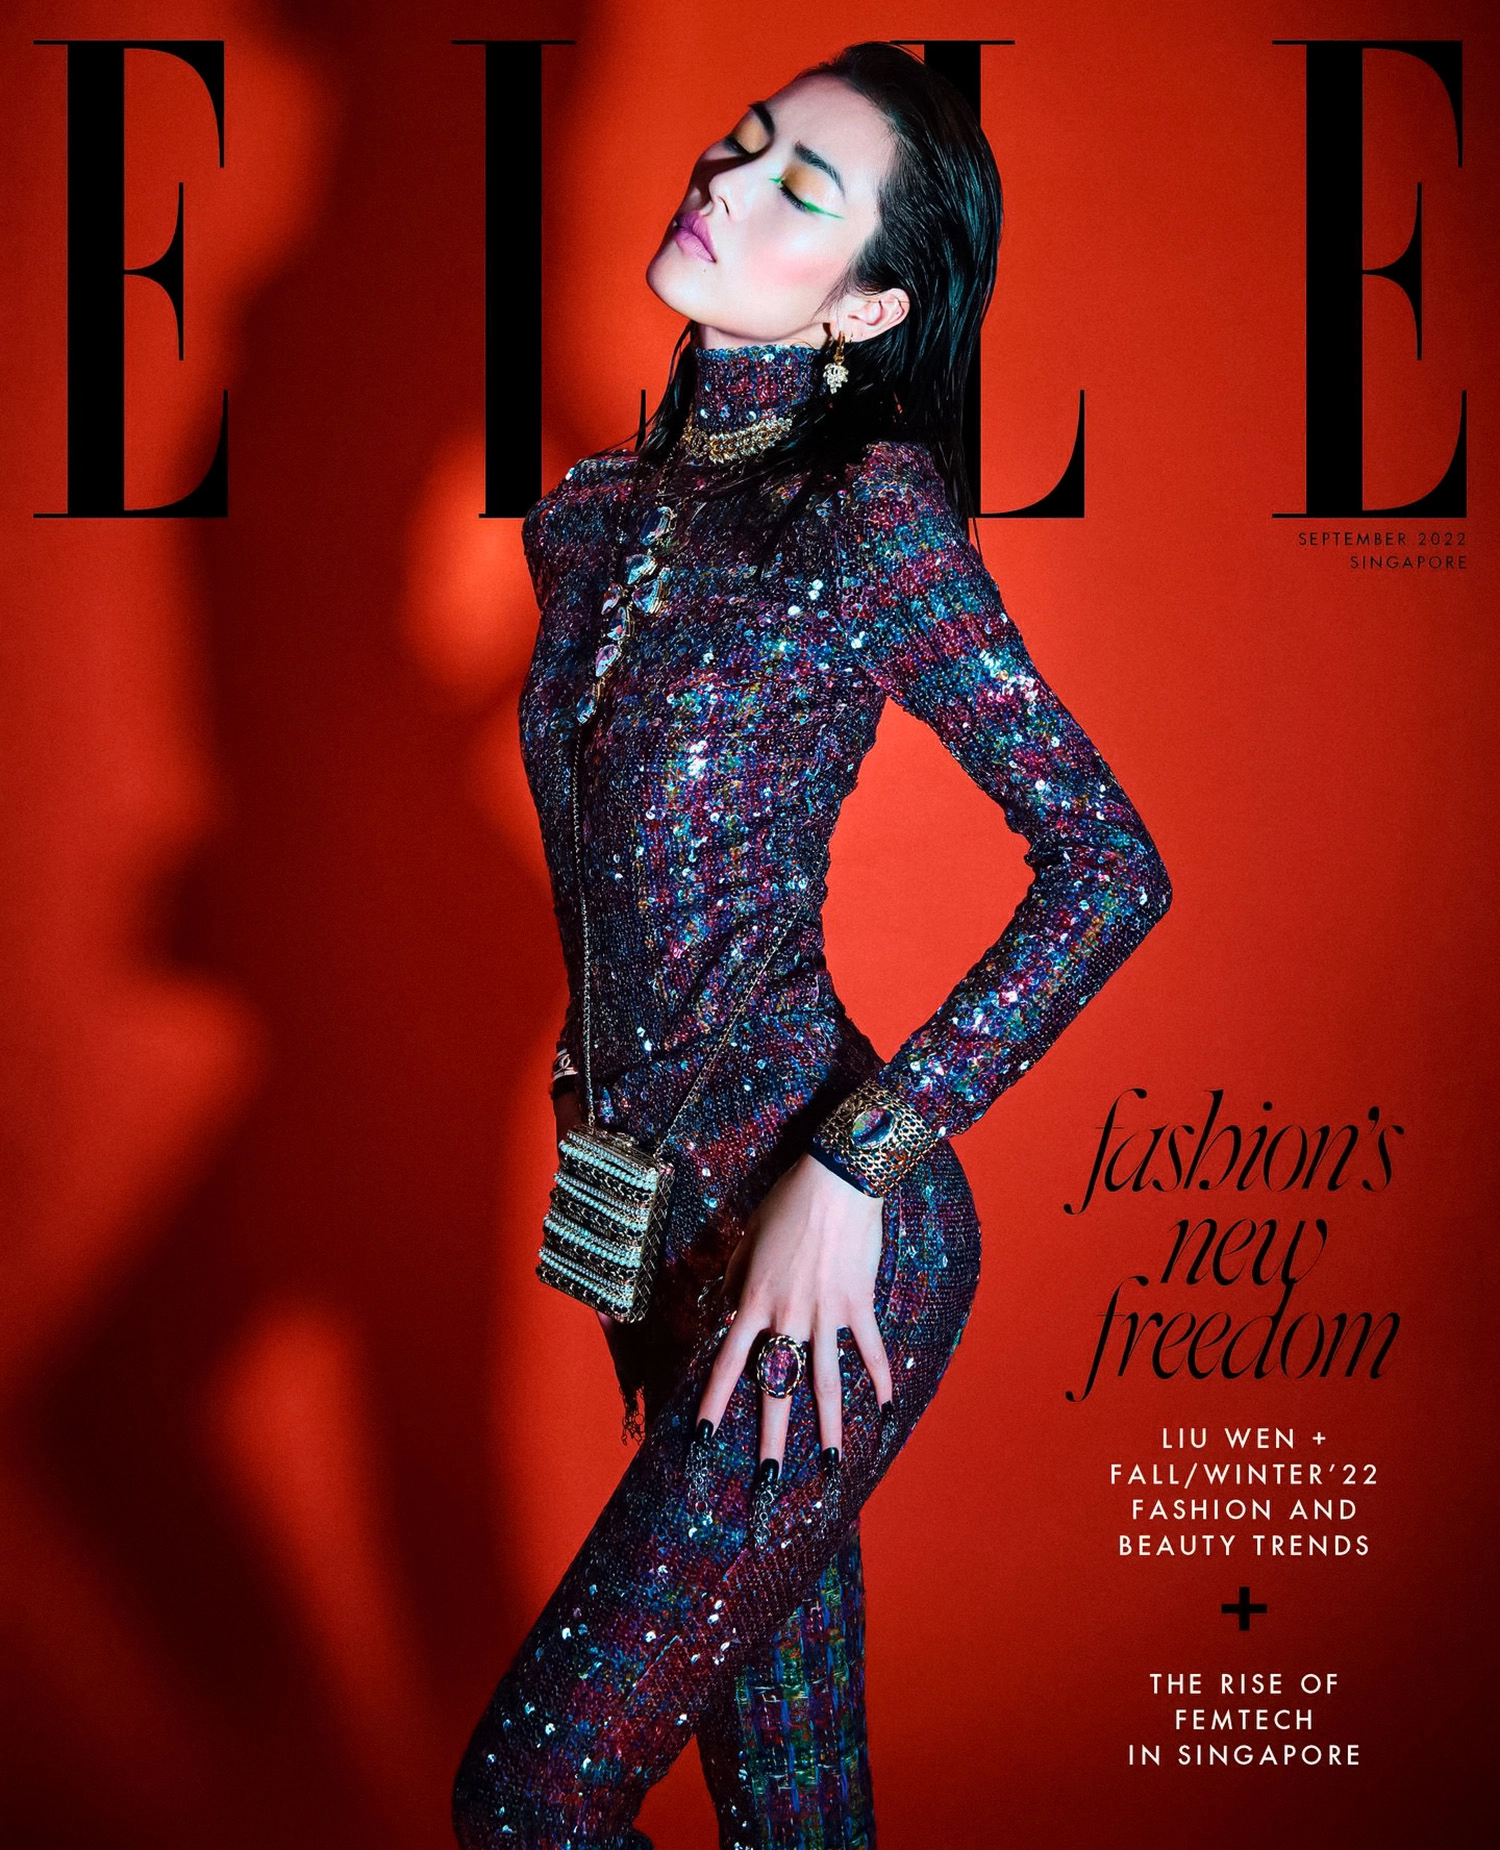 Liu Wen in Chanel on Elle Singapore September 2022 covers by Yu Cong